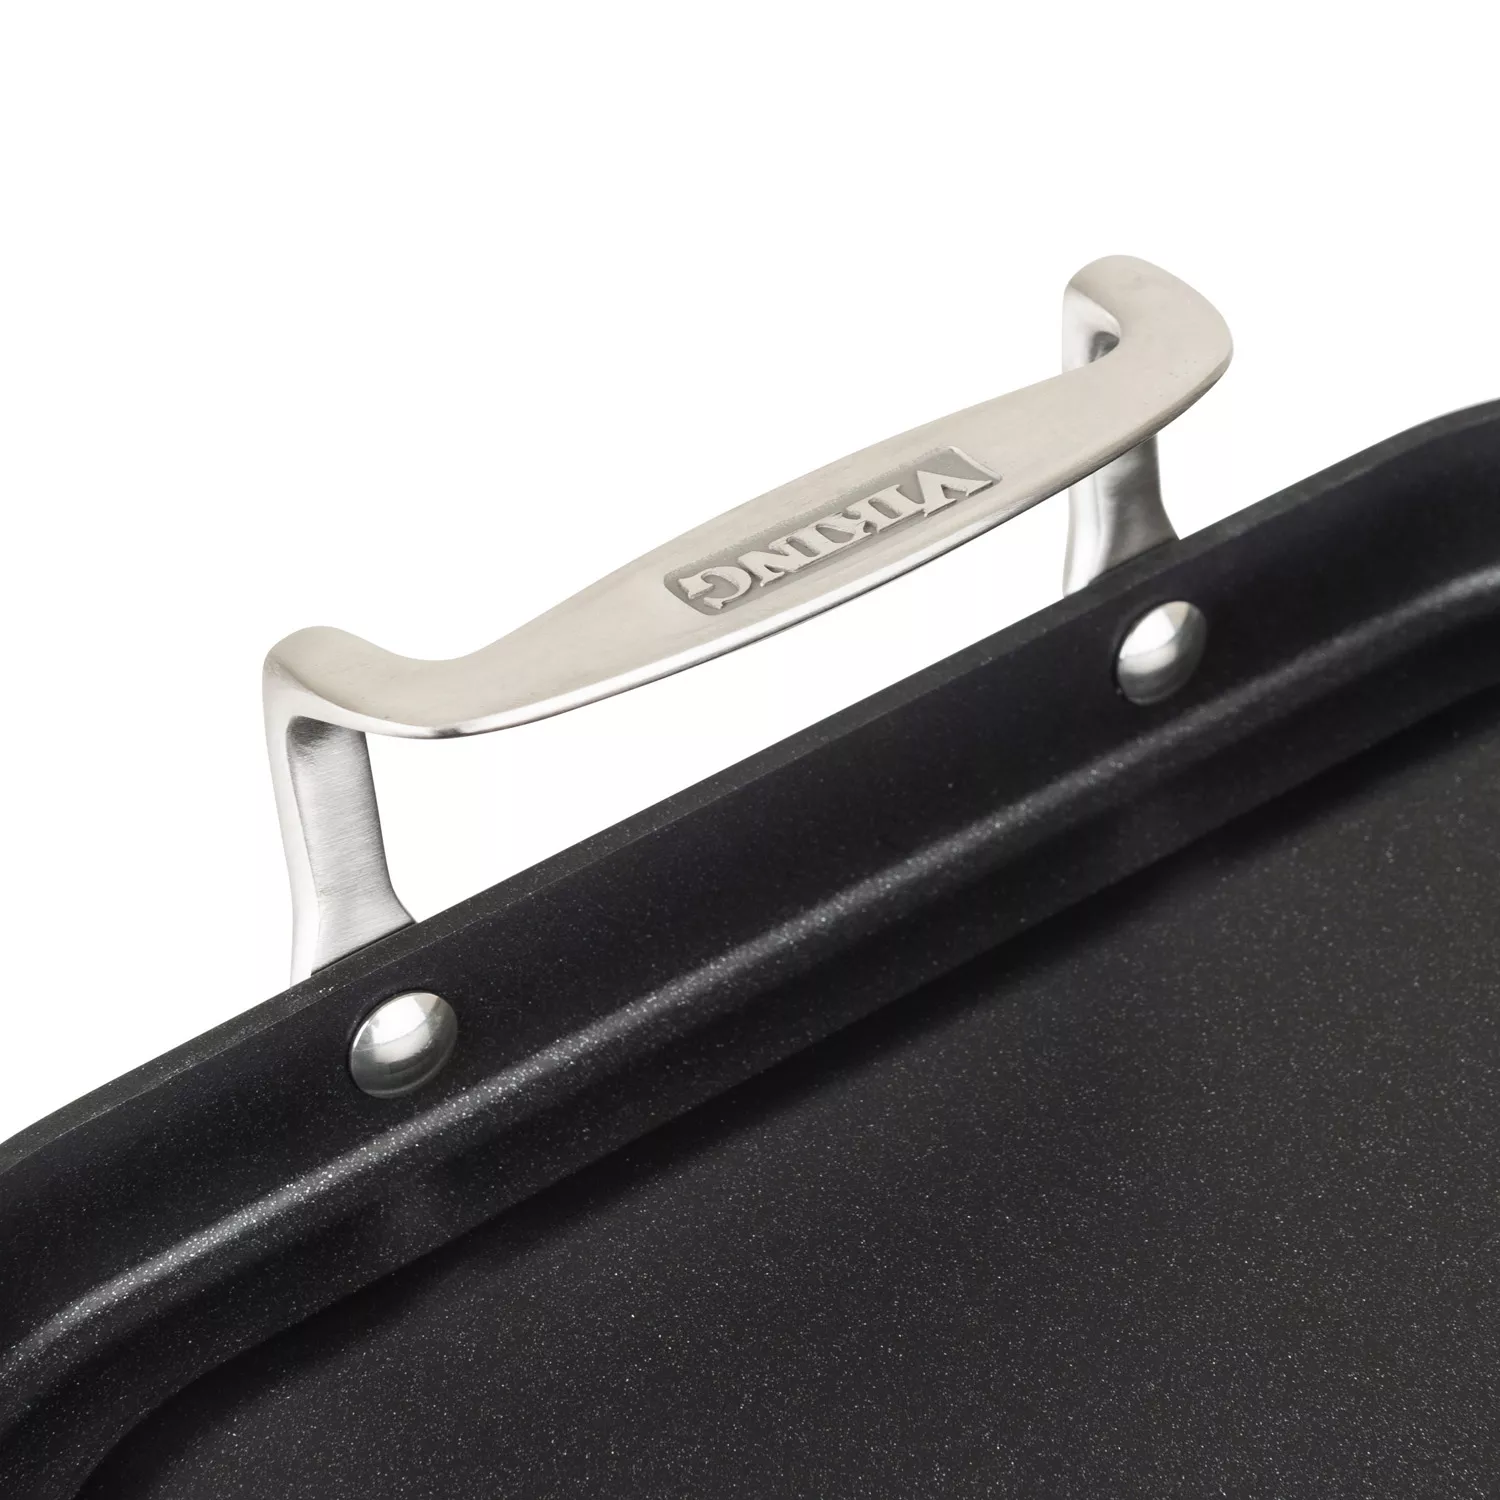 Nordic Ware High Sided Griddle With Handles